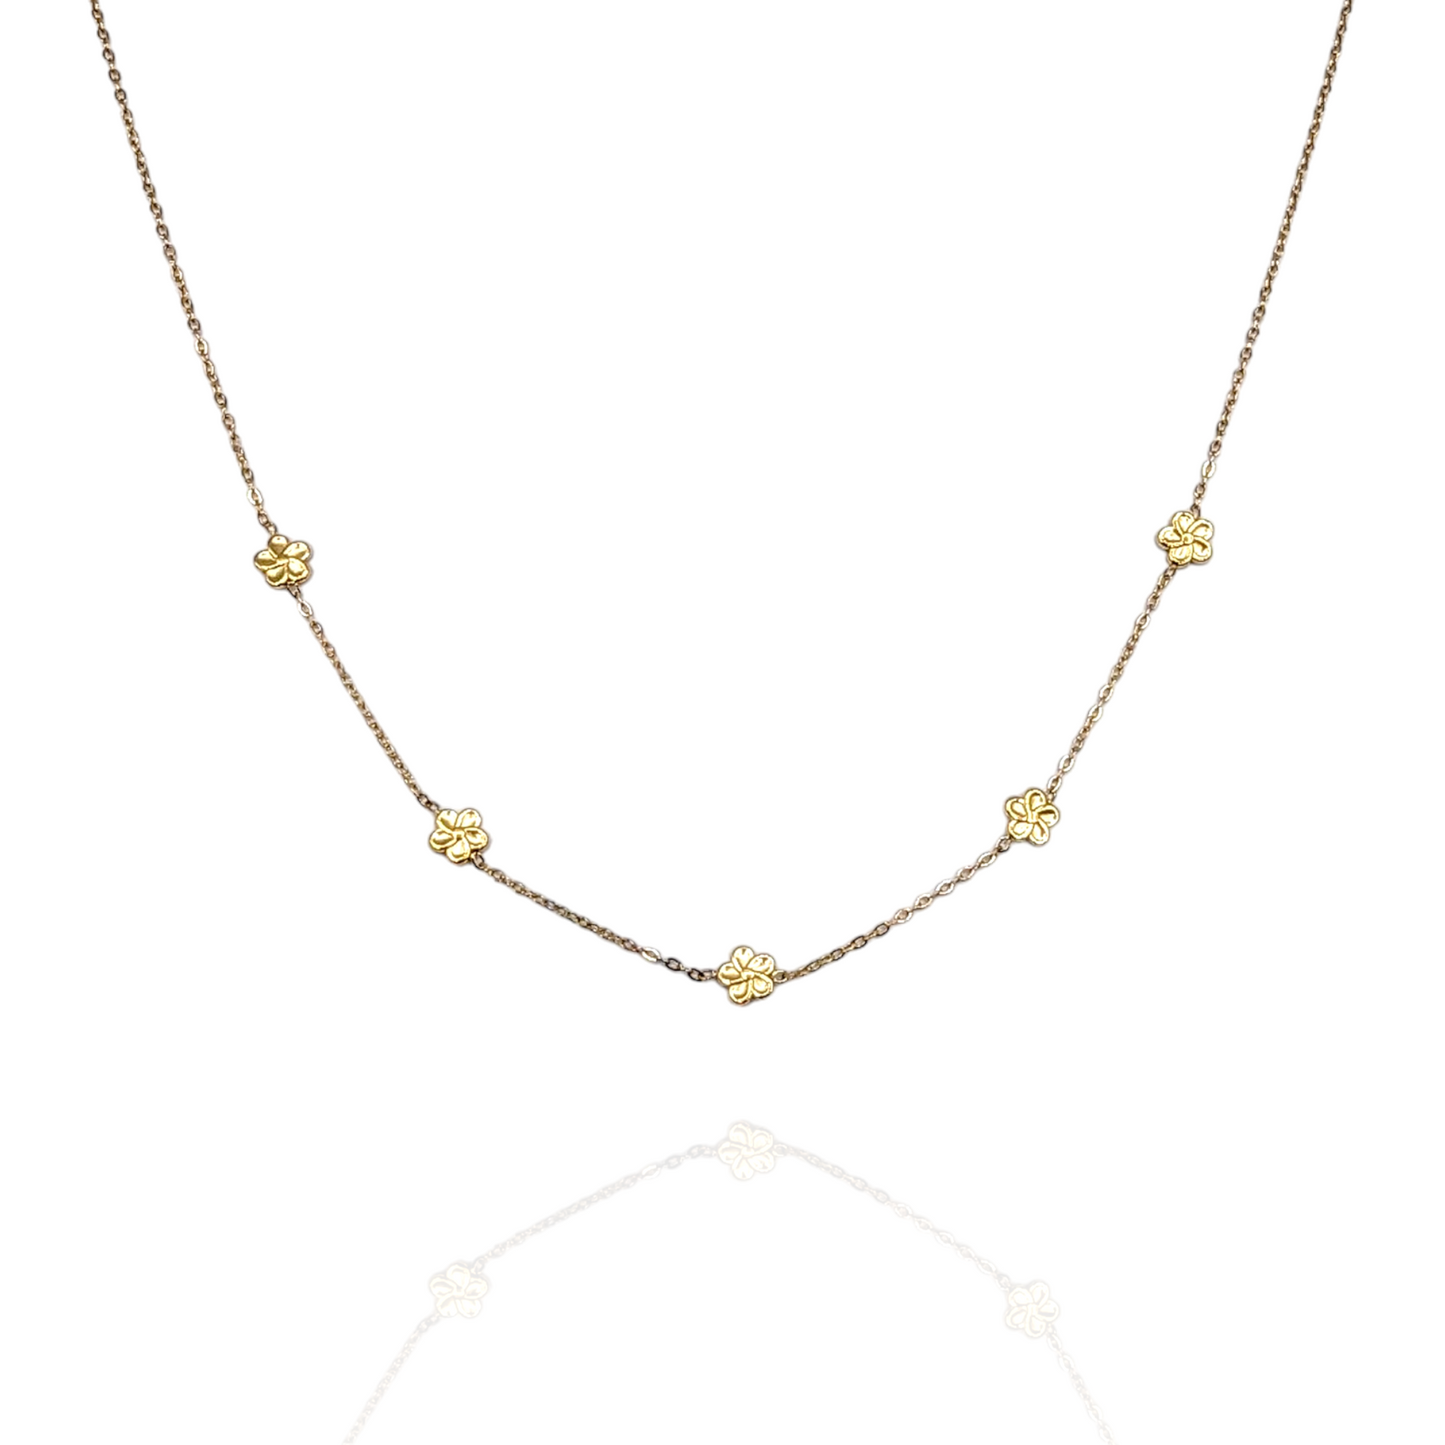 Lady Margarita Necklace waterproof jewelry in stainless steal gold 18 kt Fuerteventura 